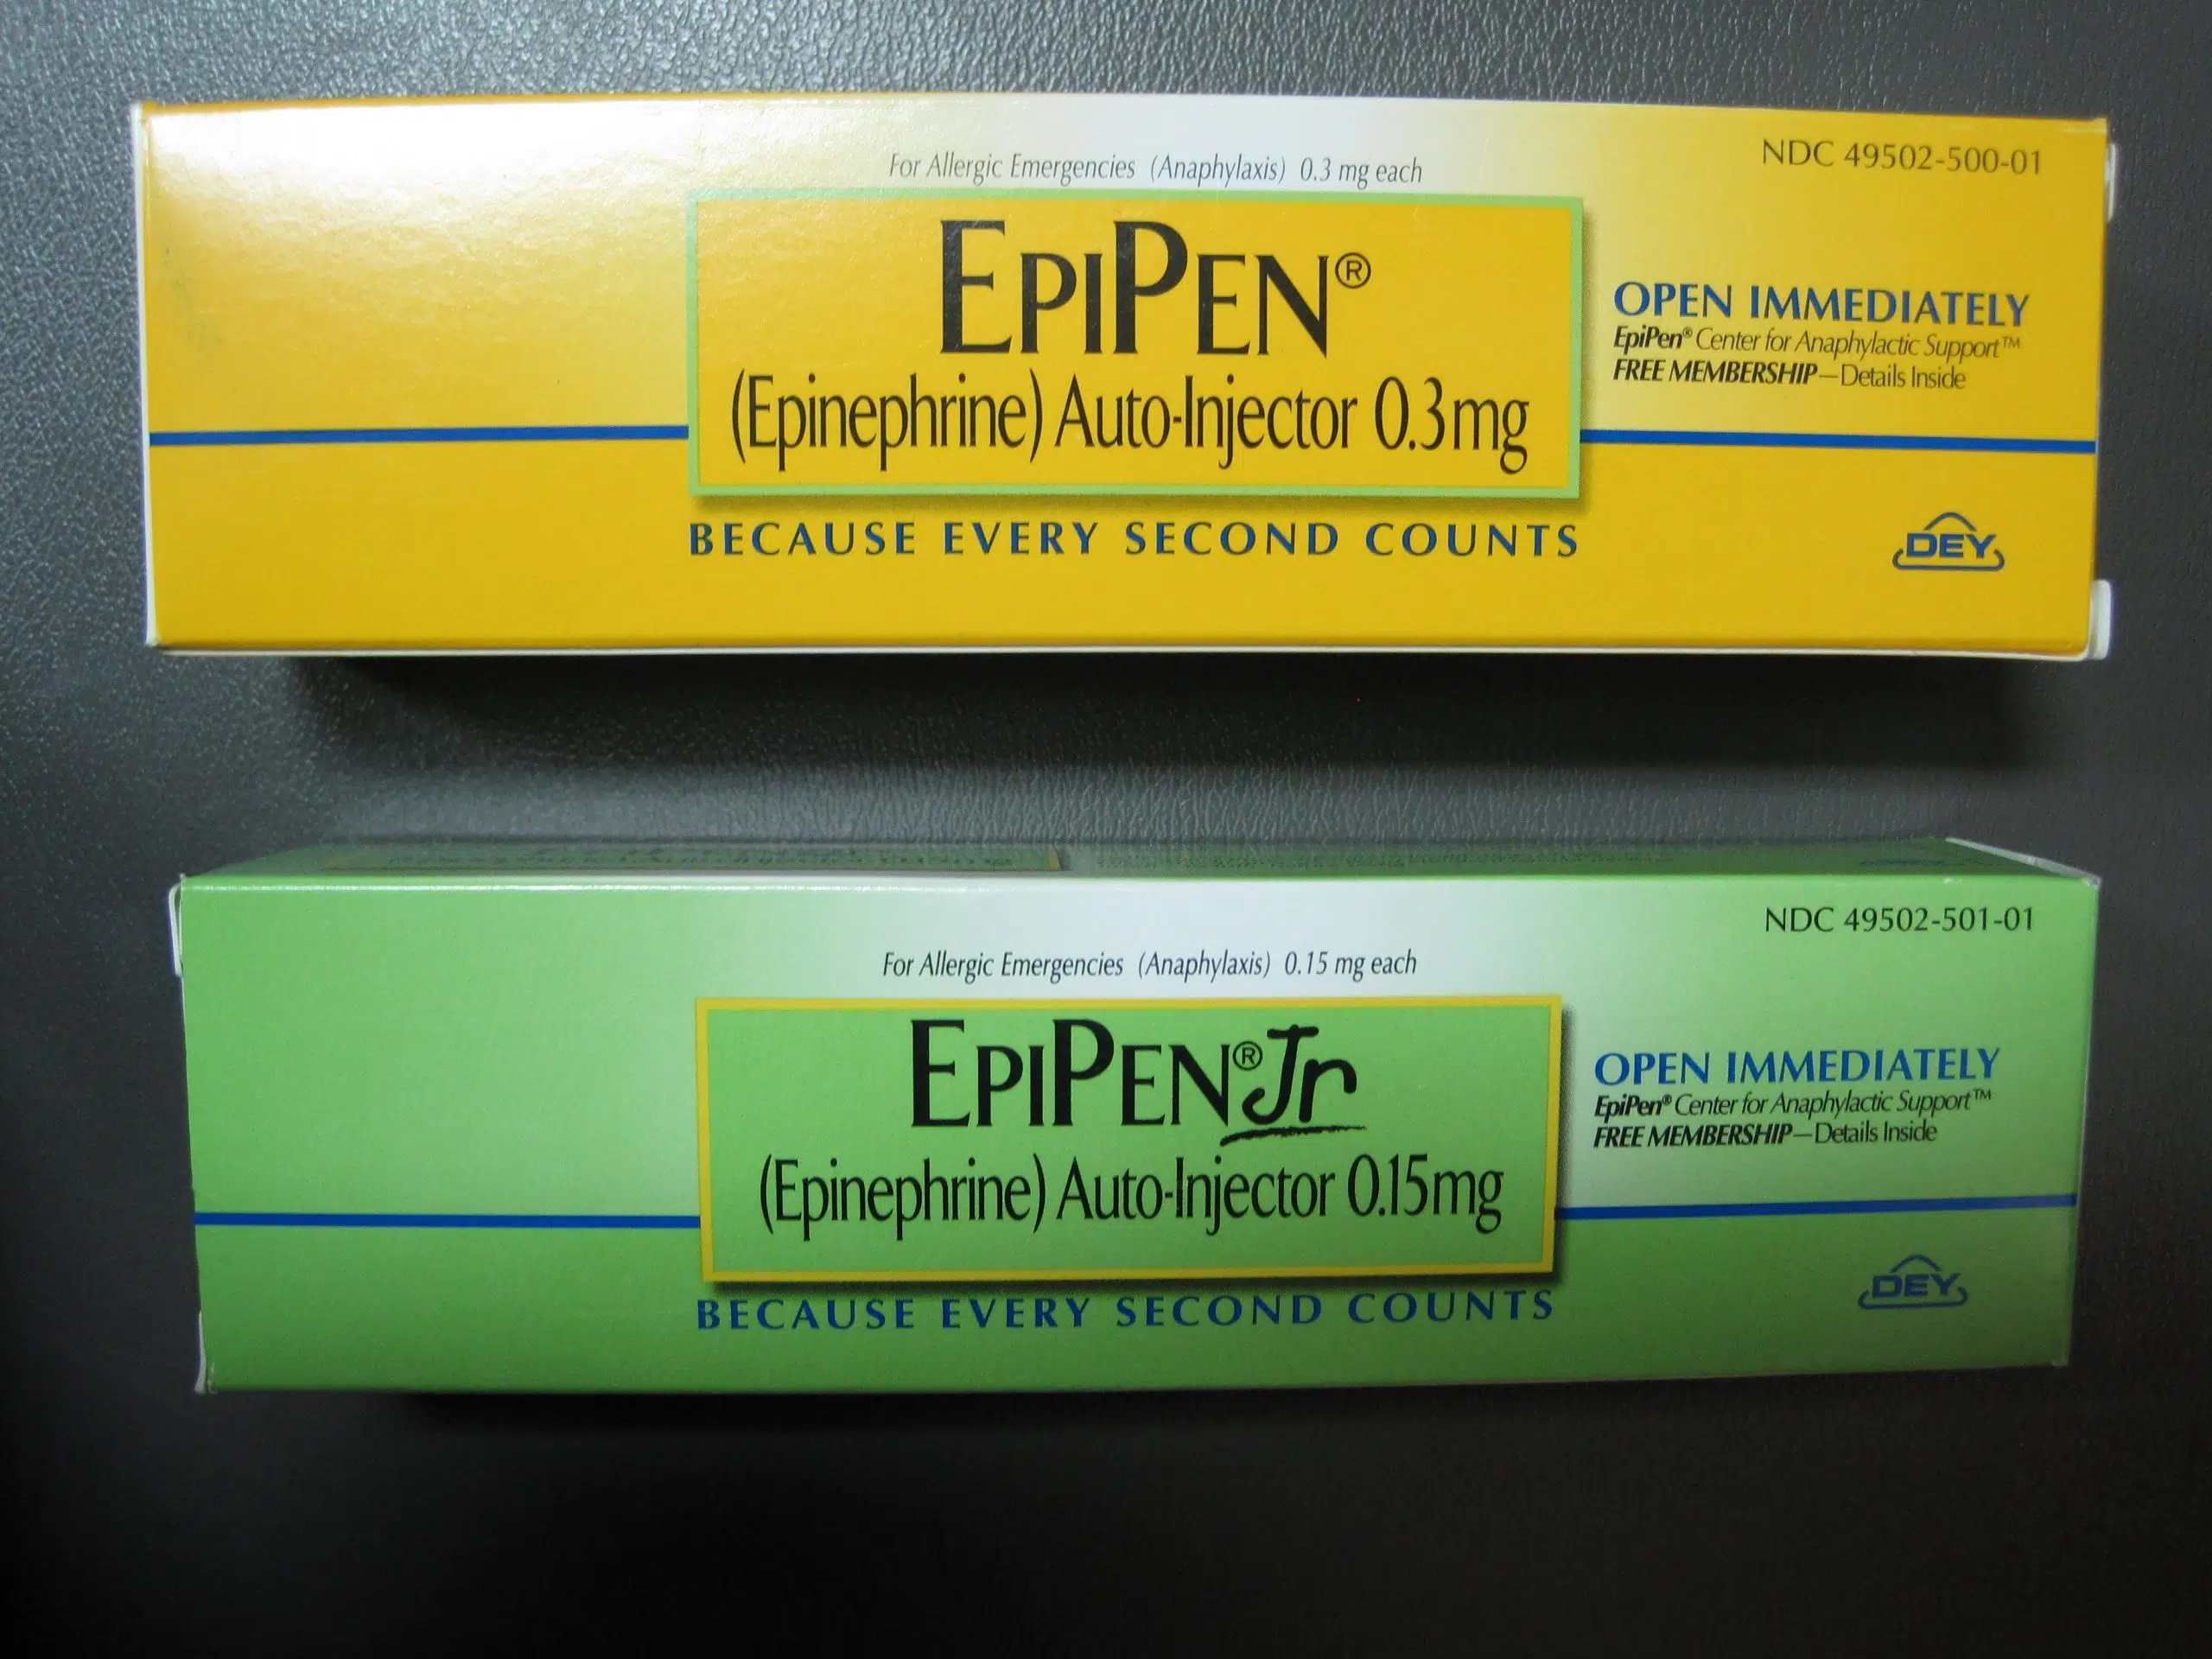 Health Canada giving folks a heads up, as the country deals with an EpiPen shortage